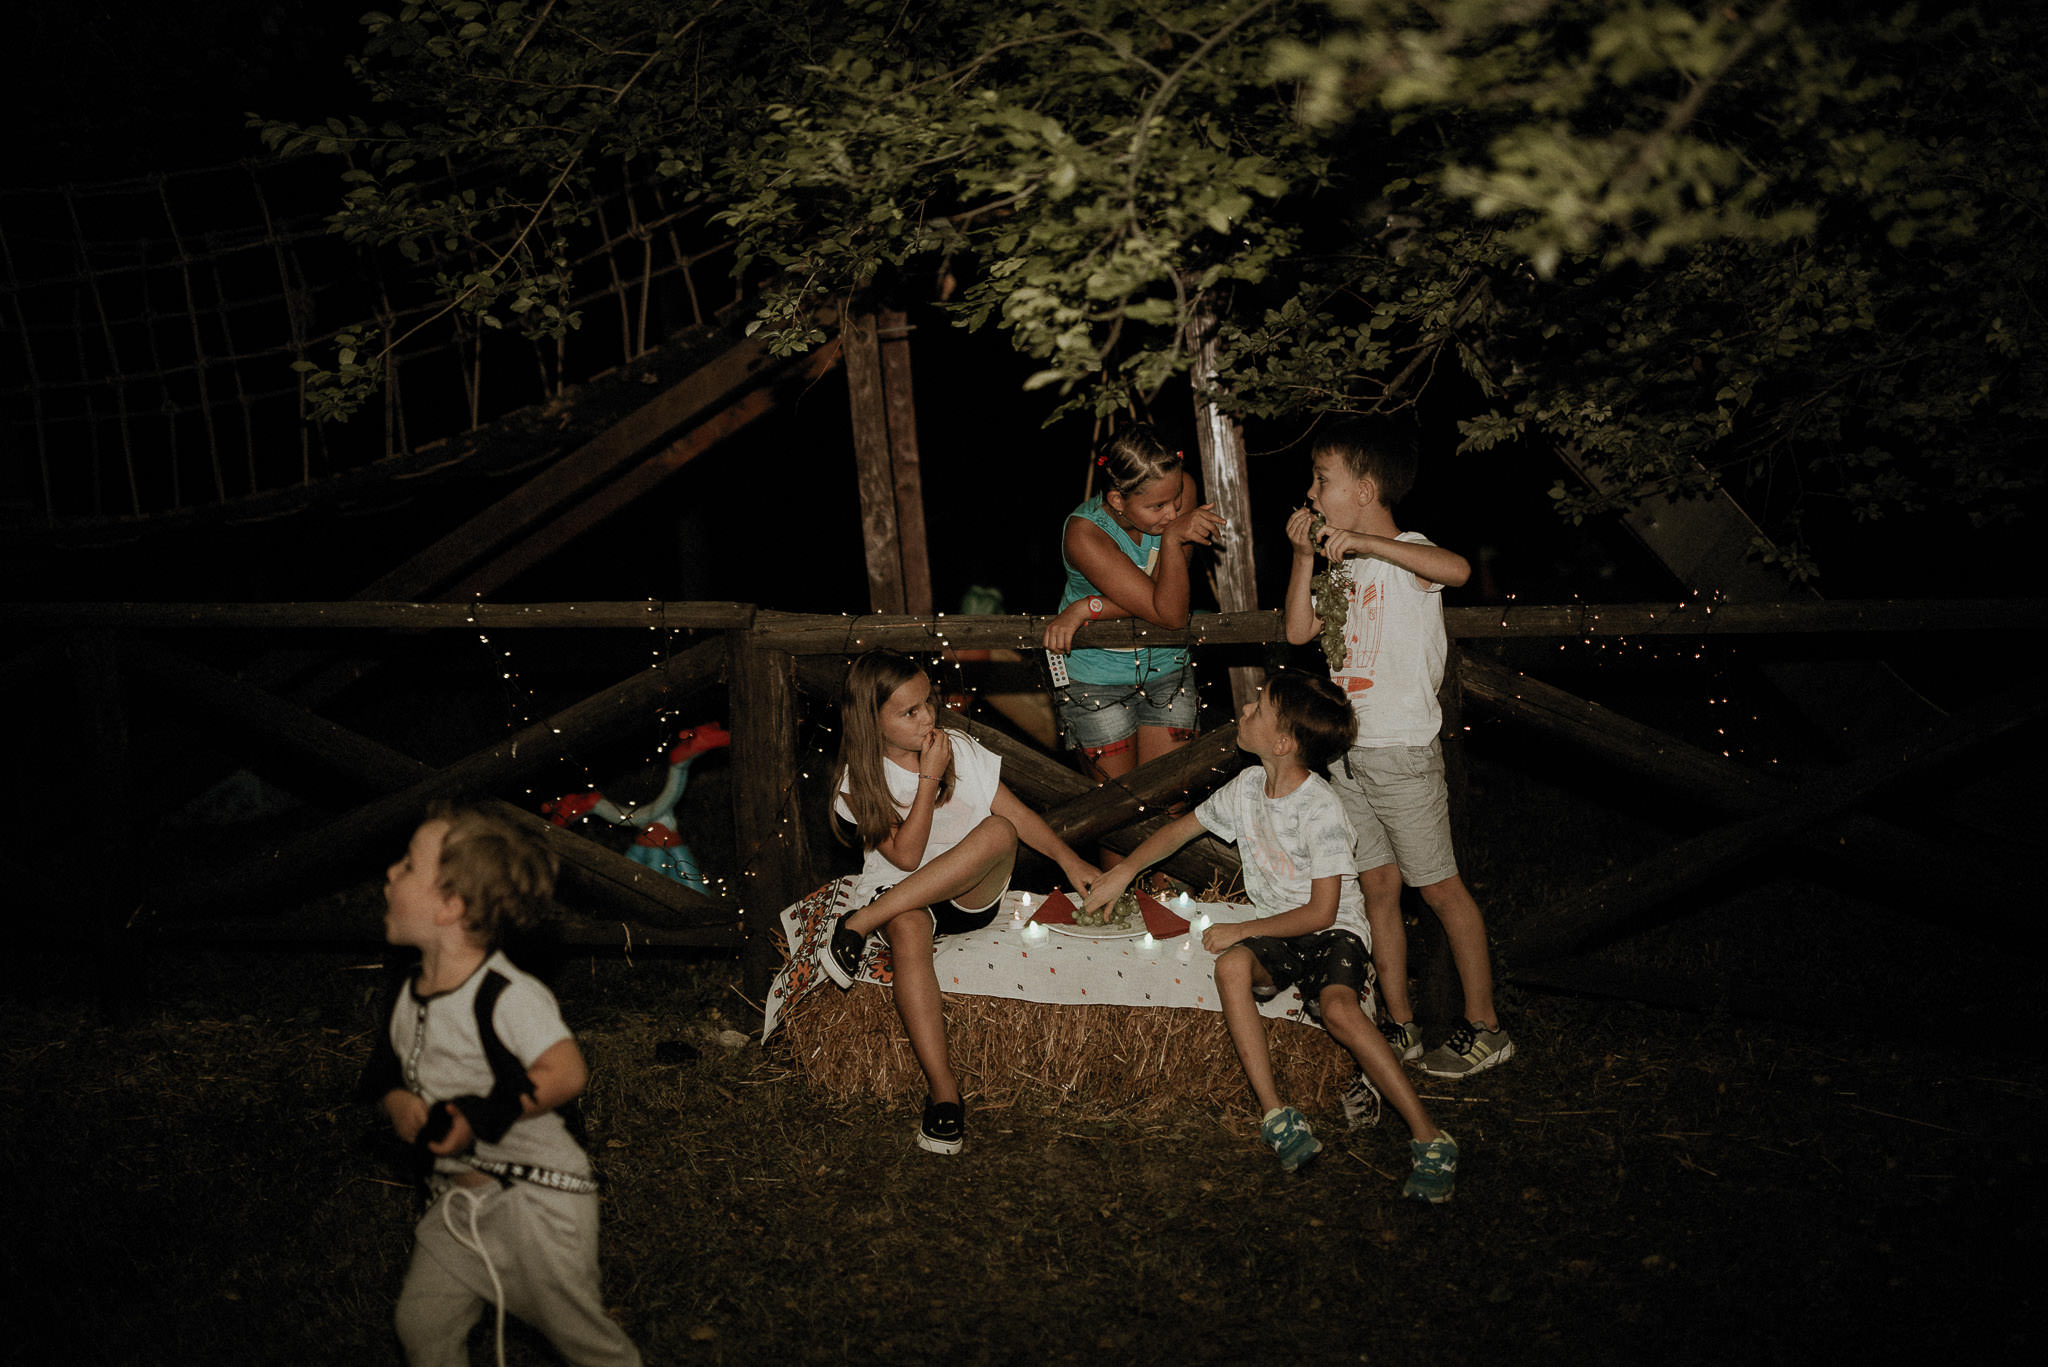 kids having fun during wedding night party in the forest